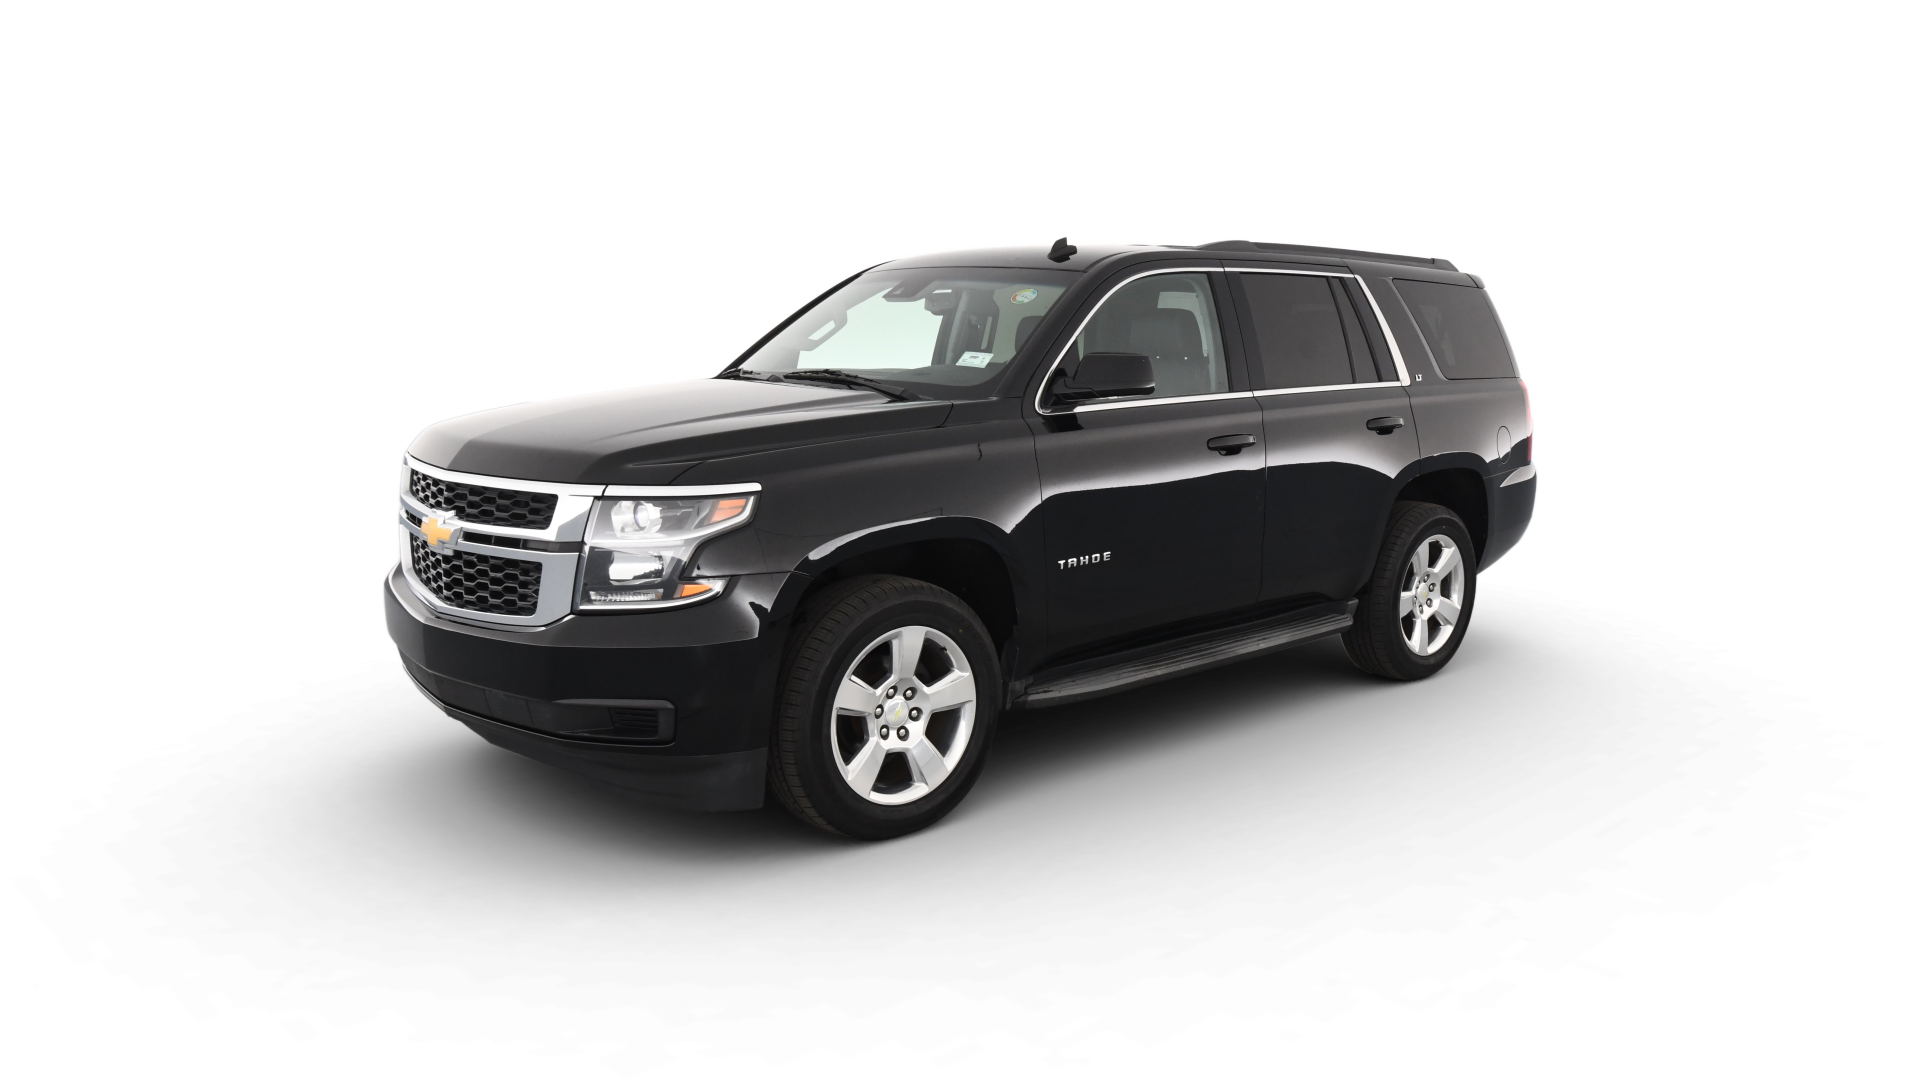 Used 2015 Chevrolet Tahoe For Sale Online | Carvana